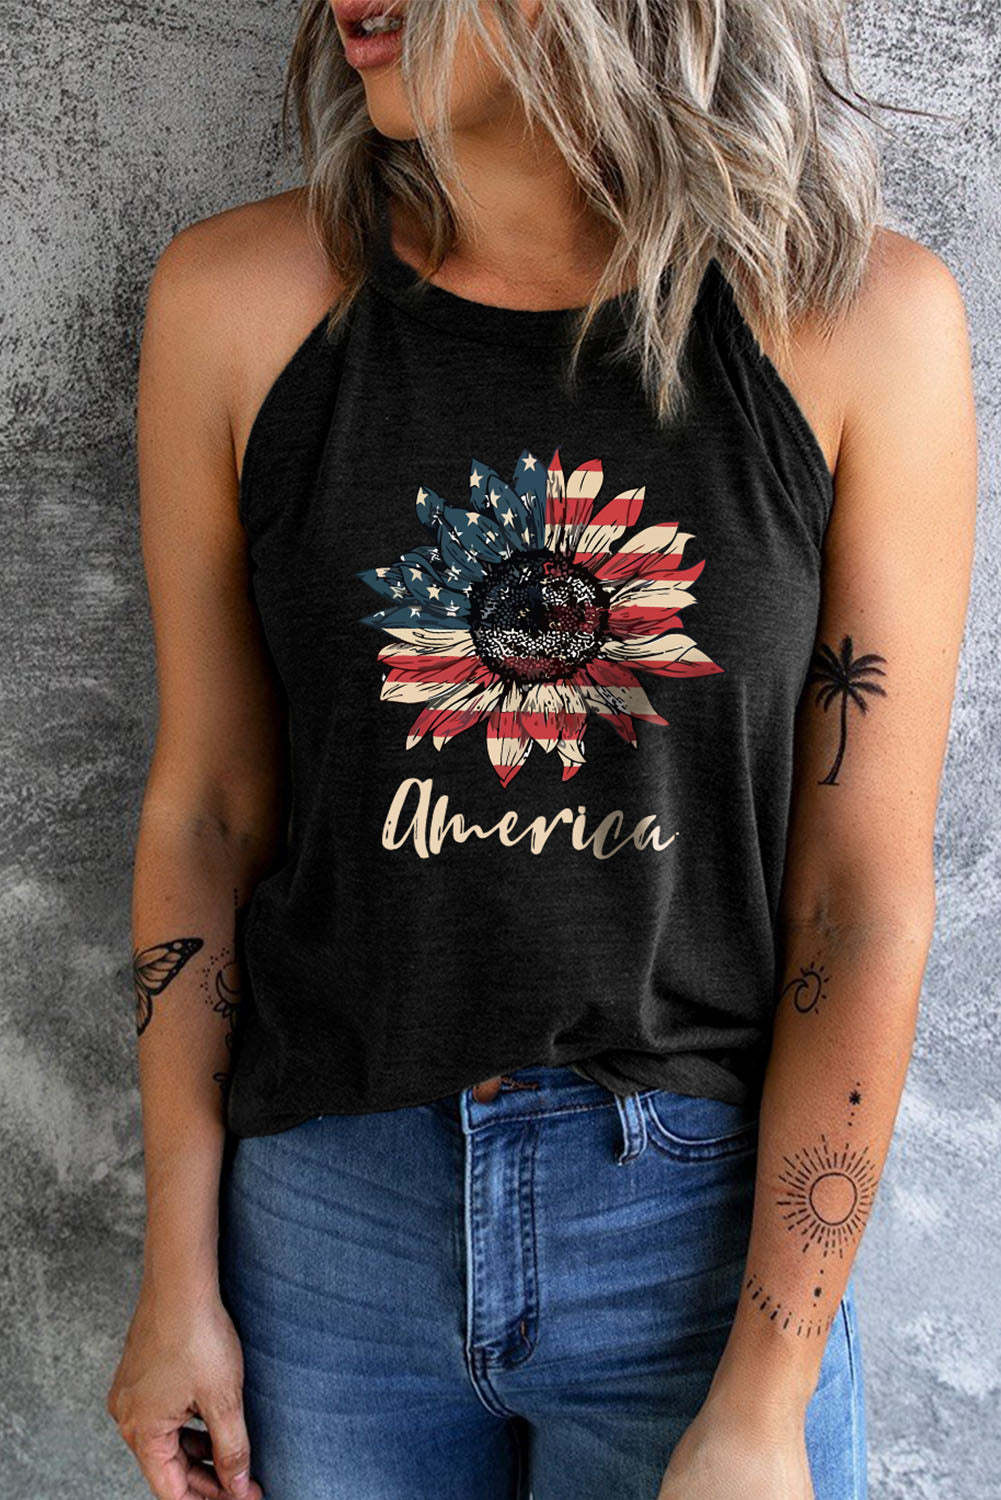 American flag Stars and Stripes Sunflower Tank Top $ 14.99 - Evaless